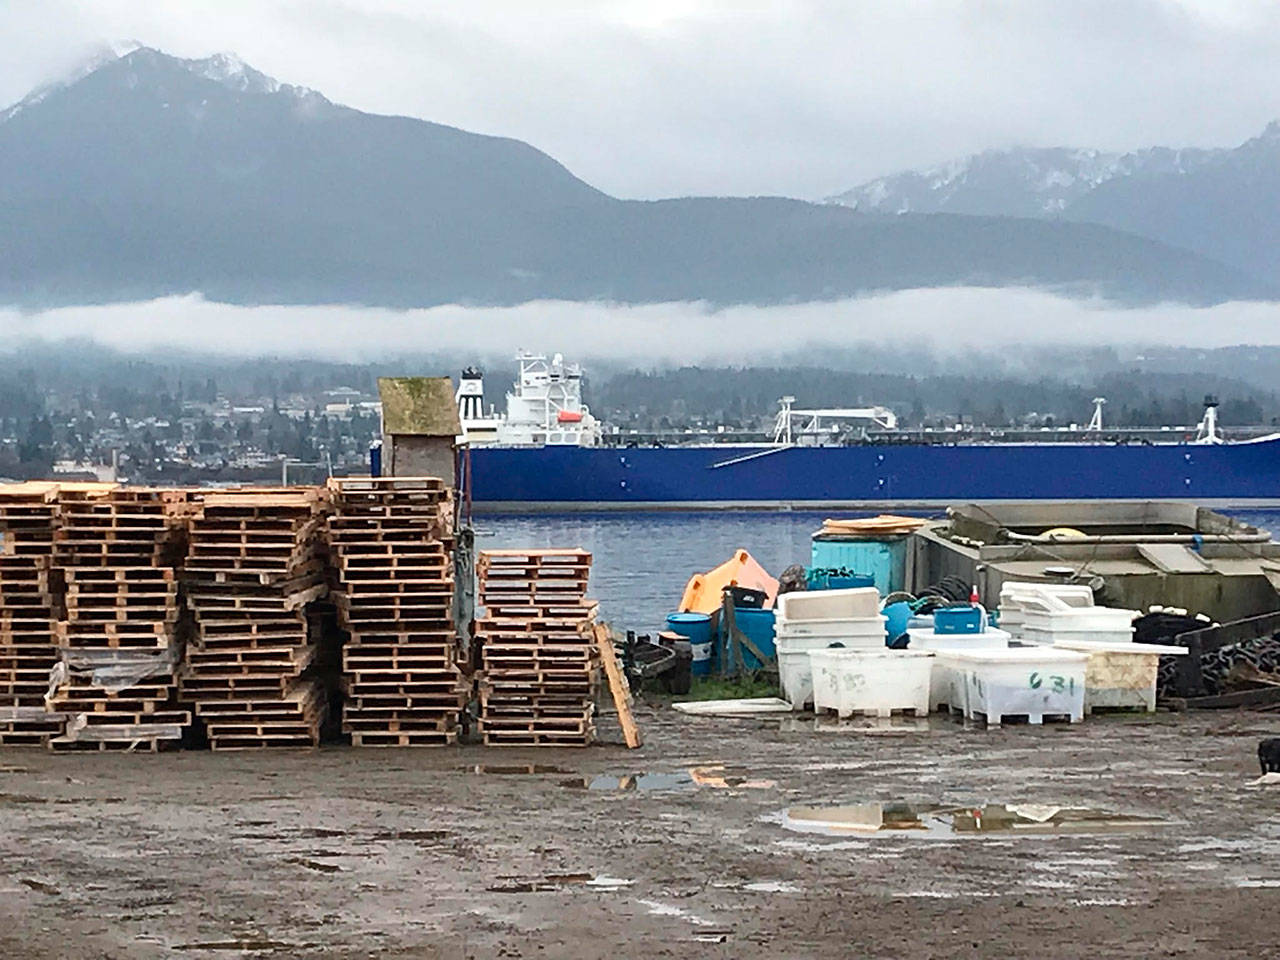 The former work area and office of Cooke Aquaculture Pacific west of the Coast Guard station on Ediz Hook is shown in December 2017. (Paul Gottlieb/Peninsula Daily News)